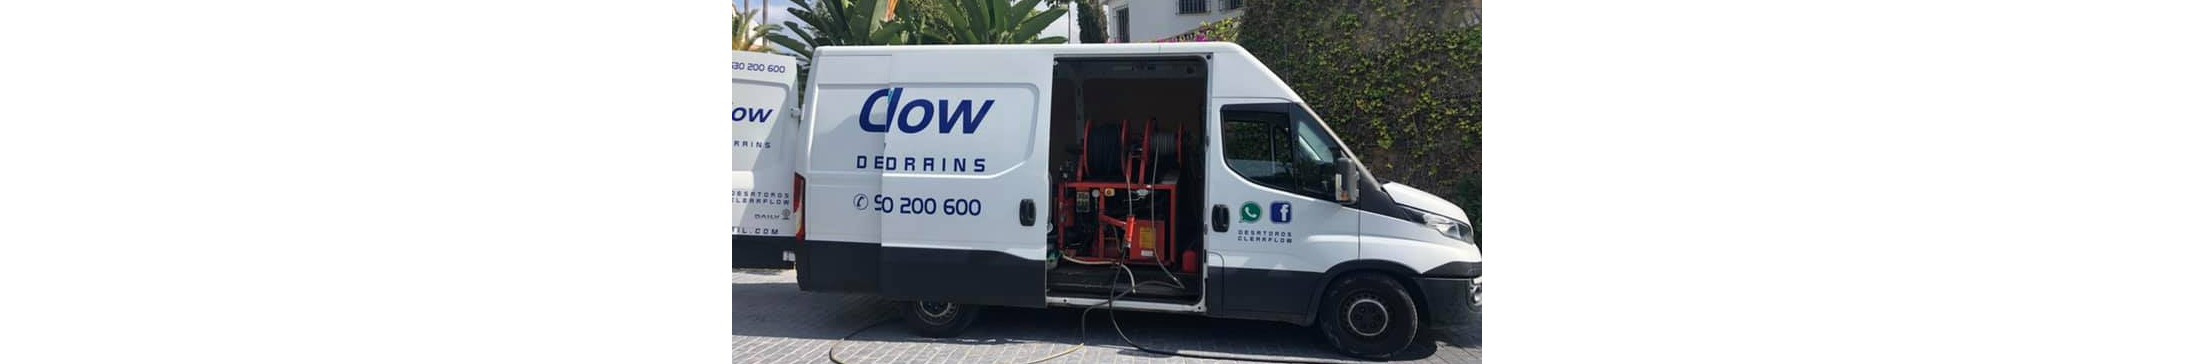 Clearflow drain & pipe services, CCTV inspections